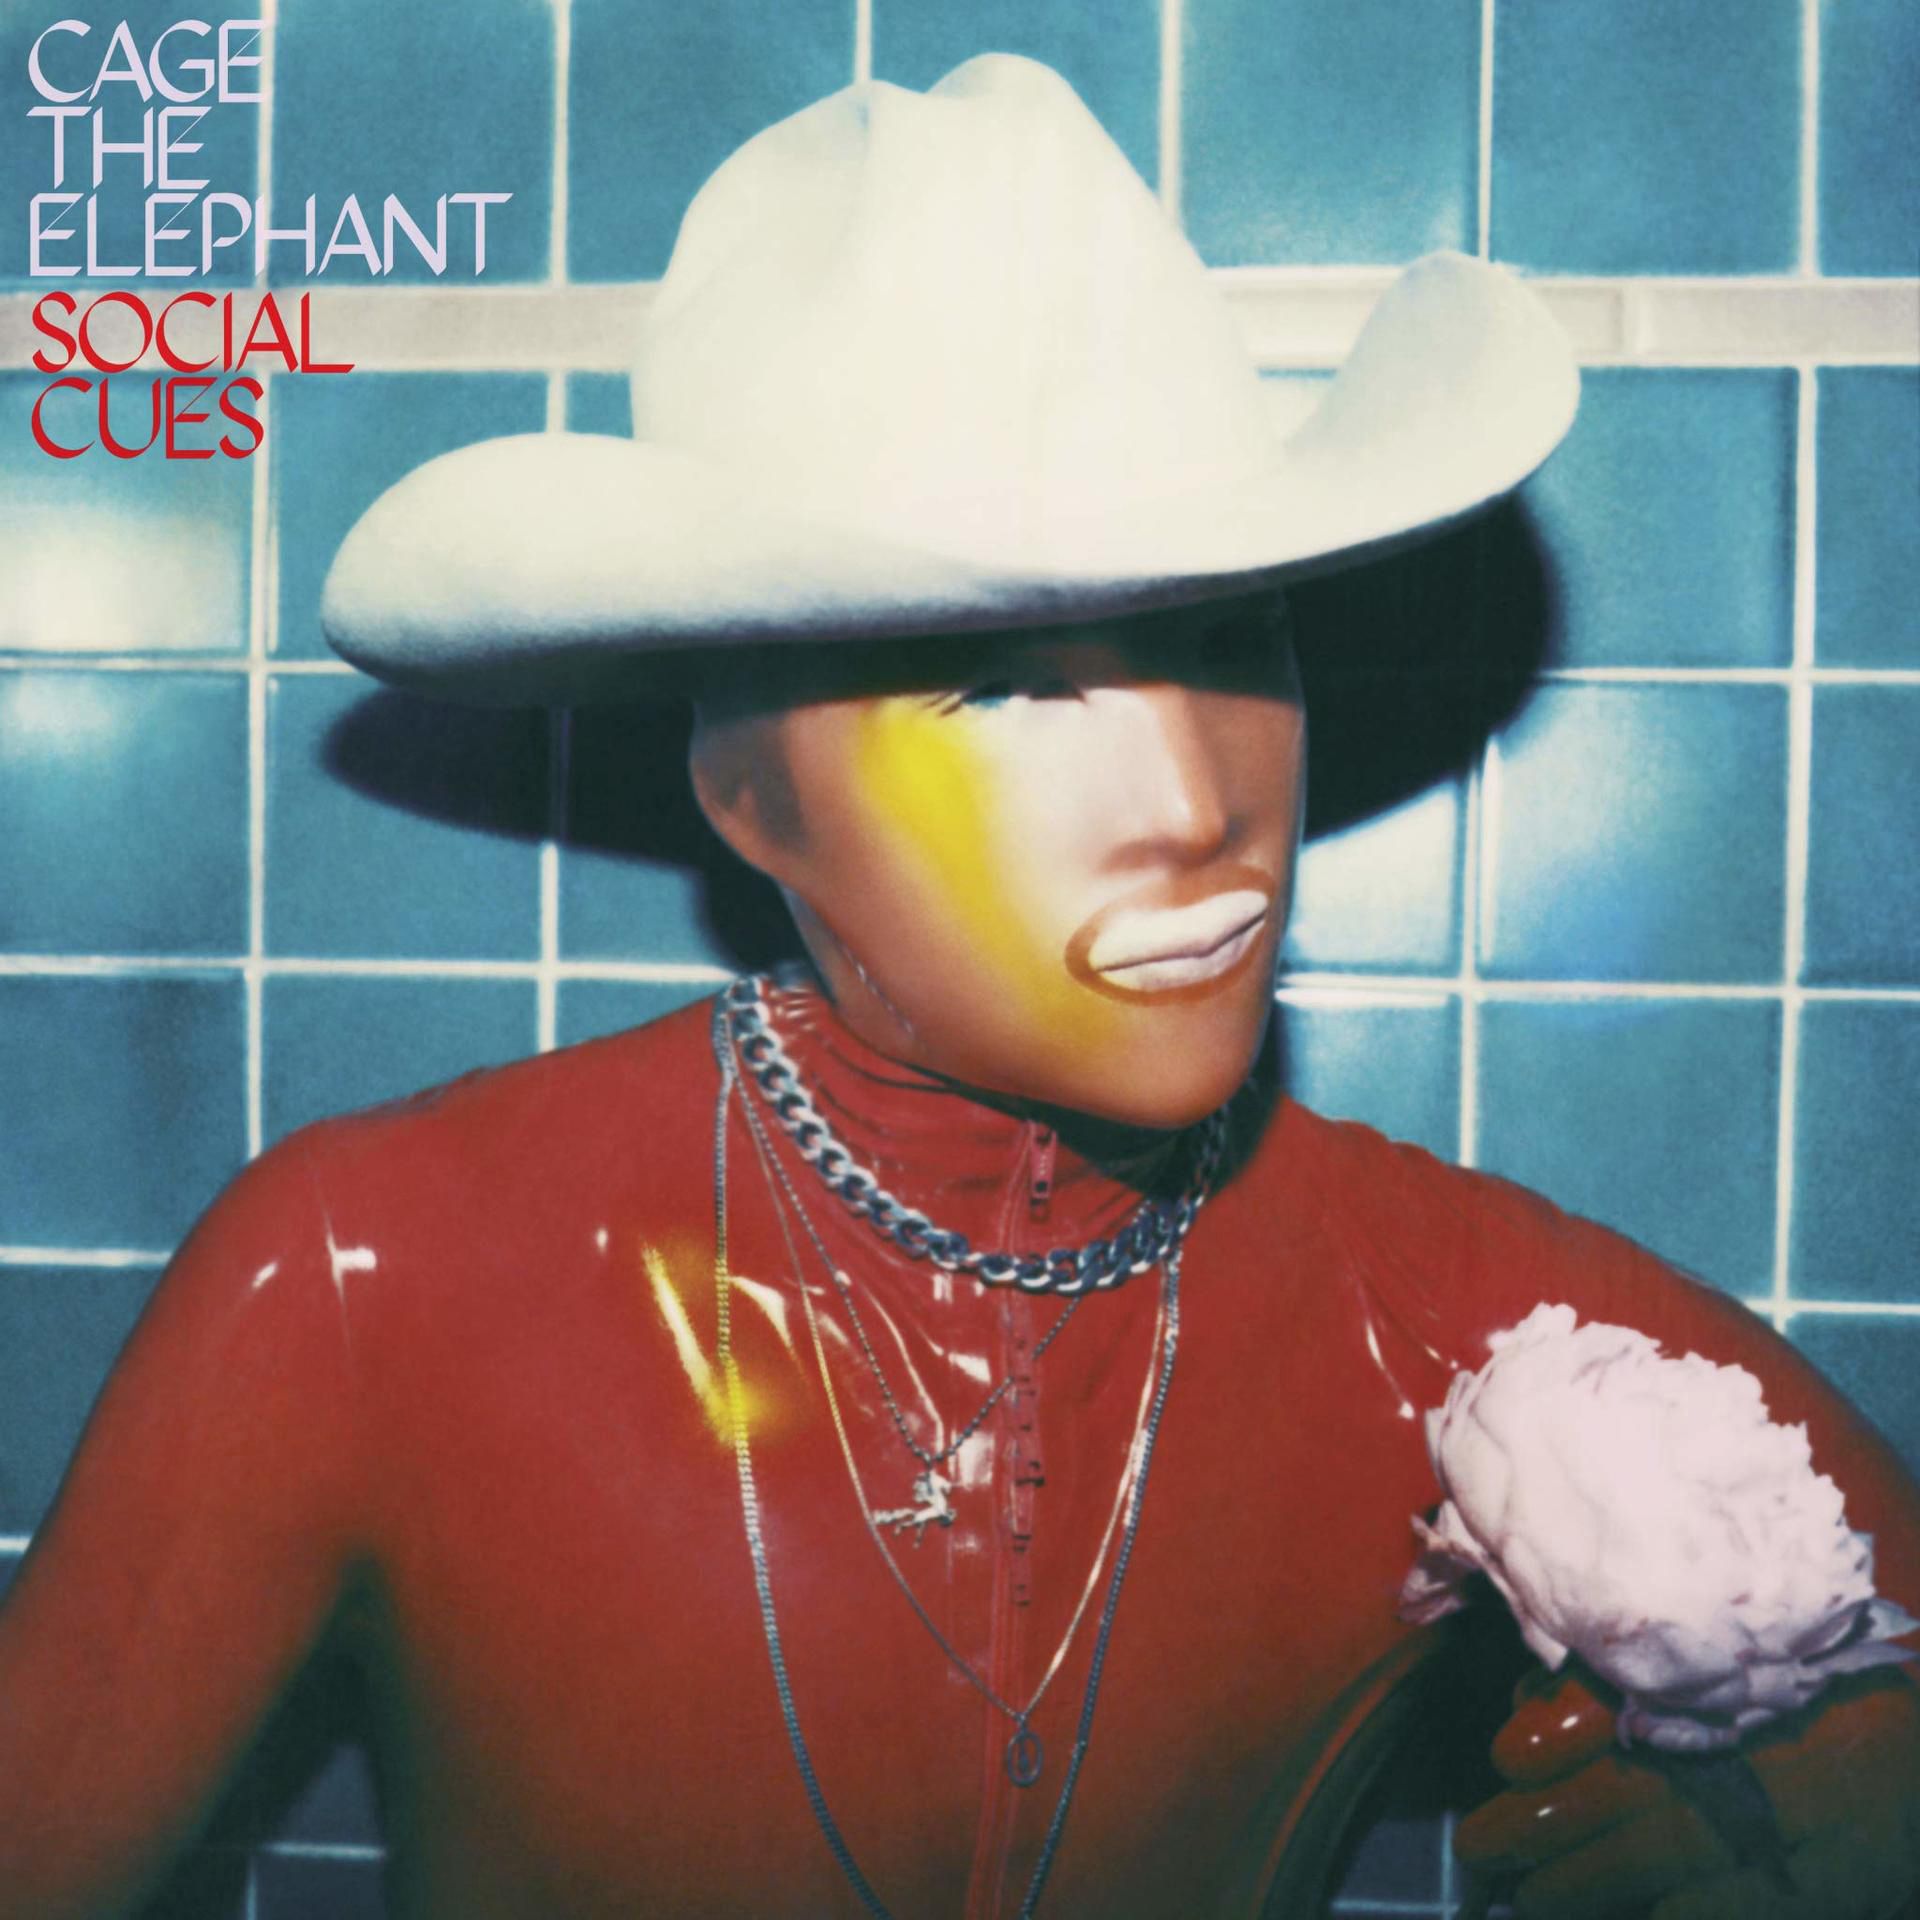 Cage The Elephant - - SOCIAL CUES (Vinyl)